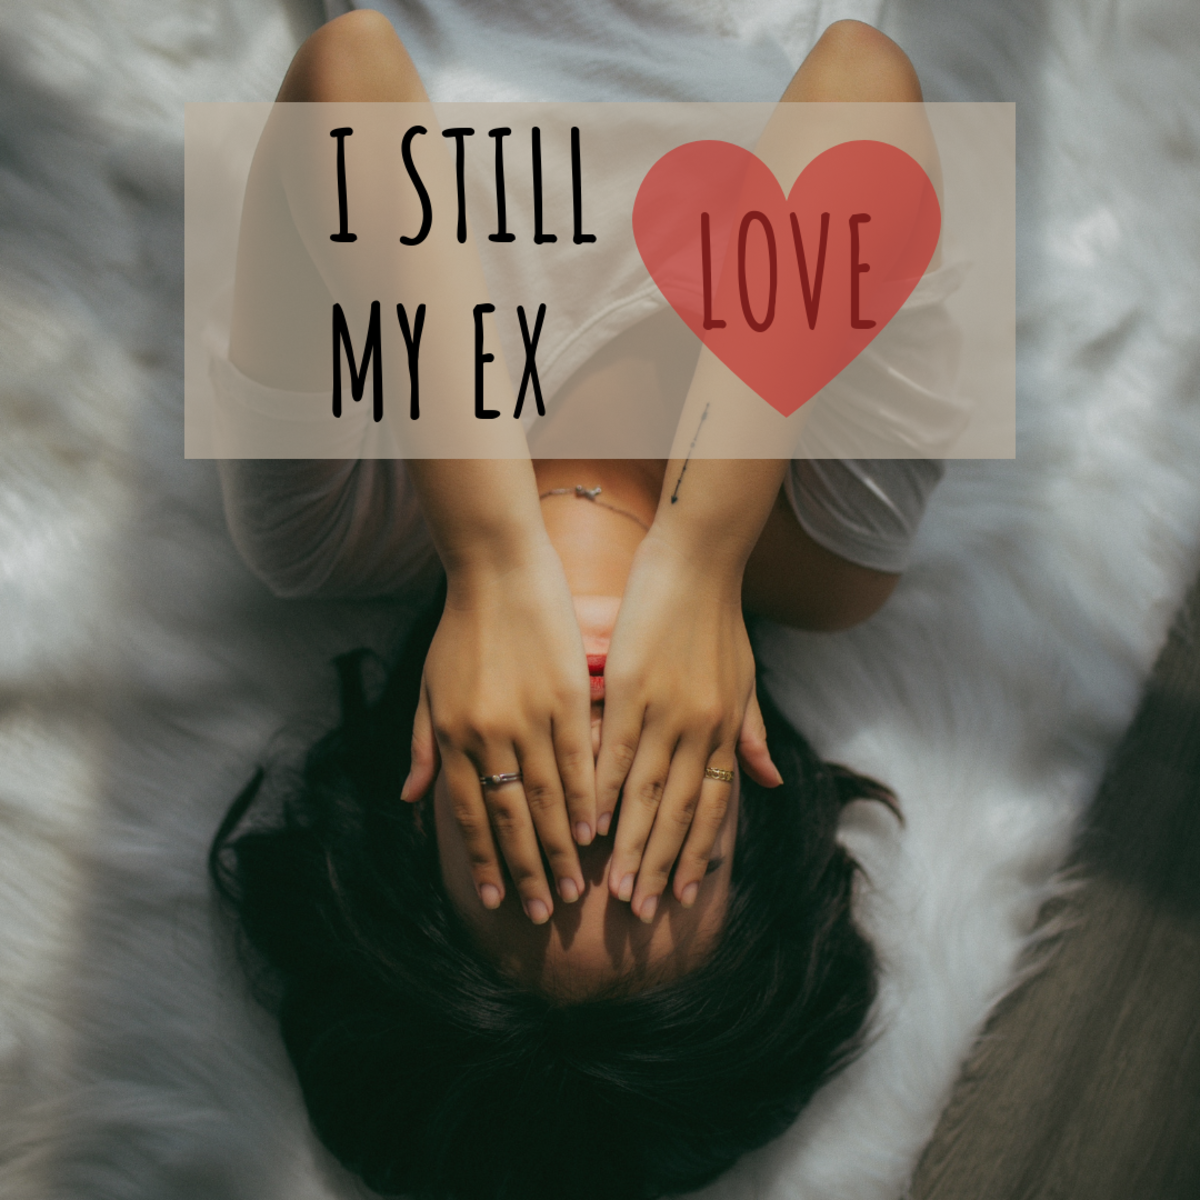 I am married, but I am still in love with my Ex - Please I need your advice